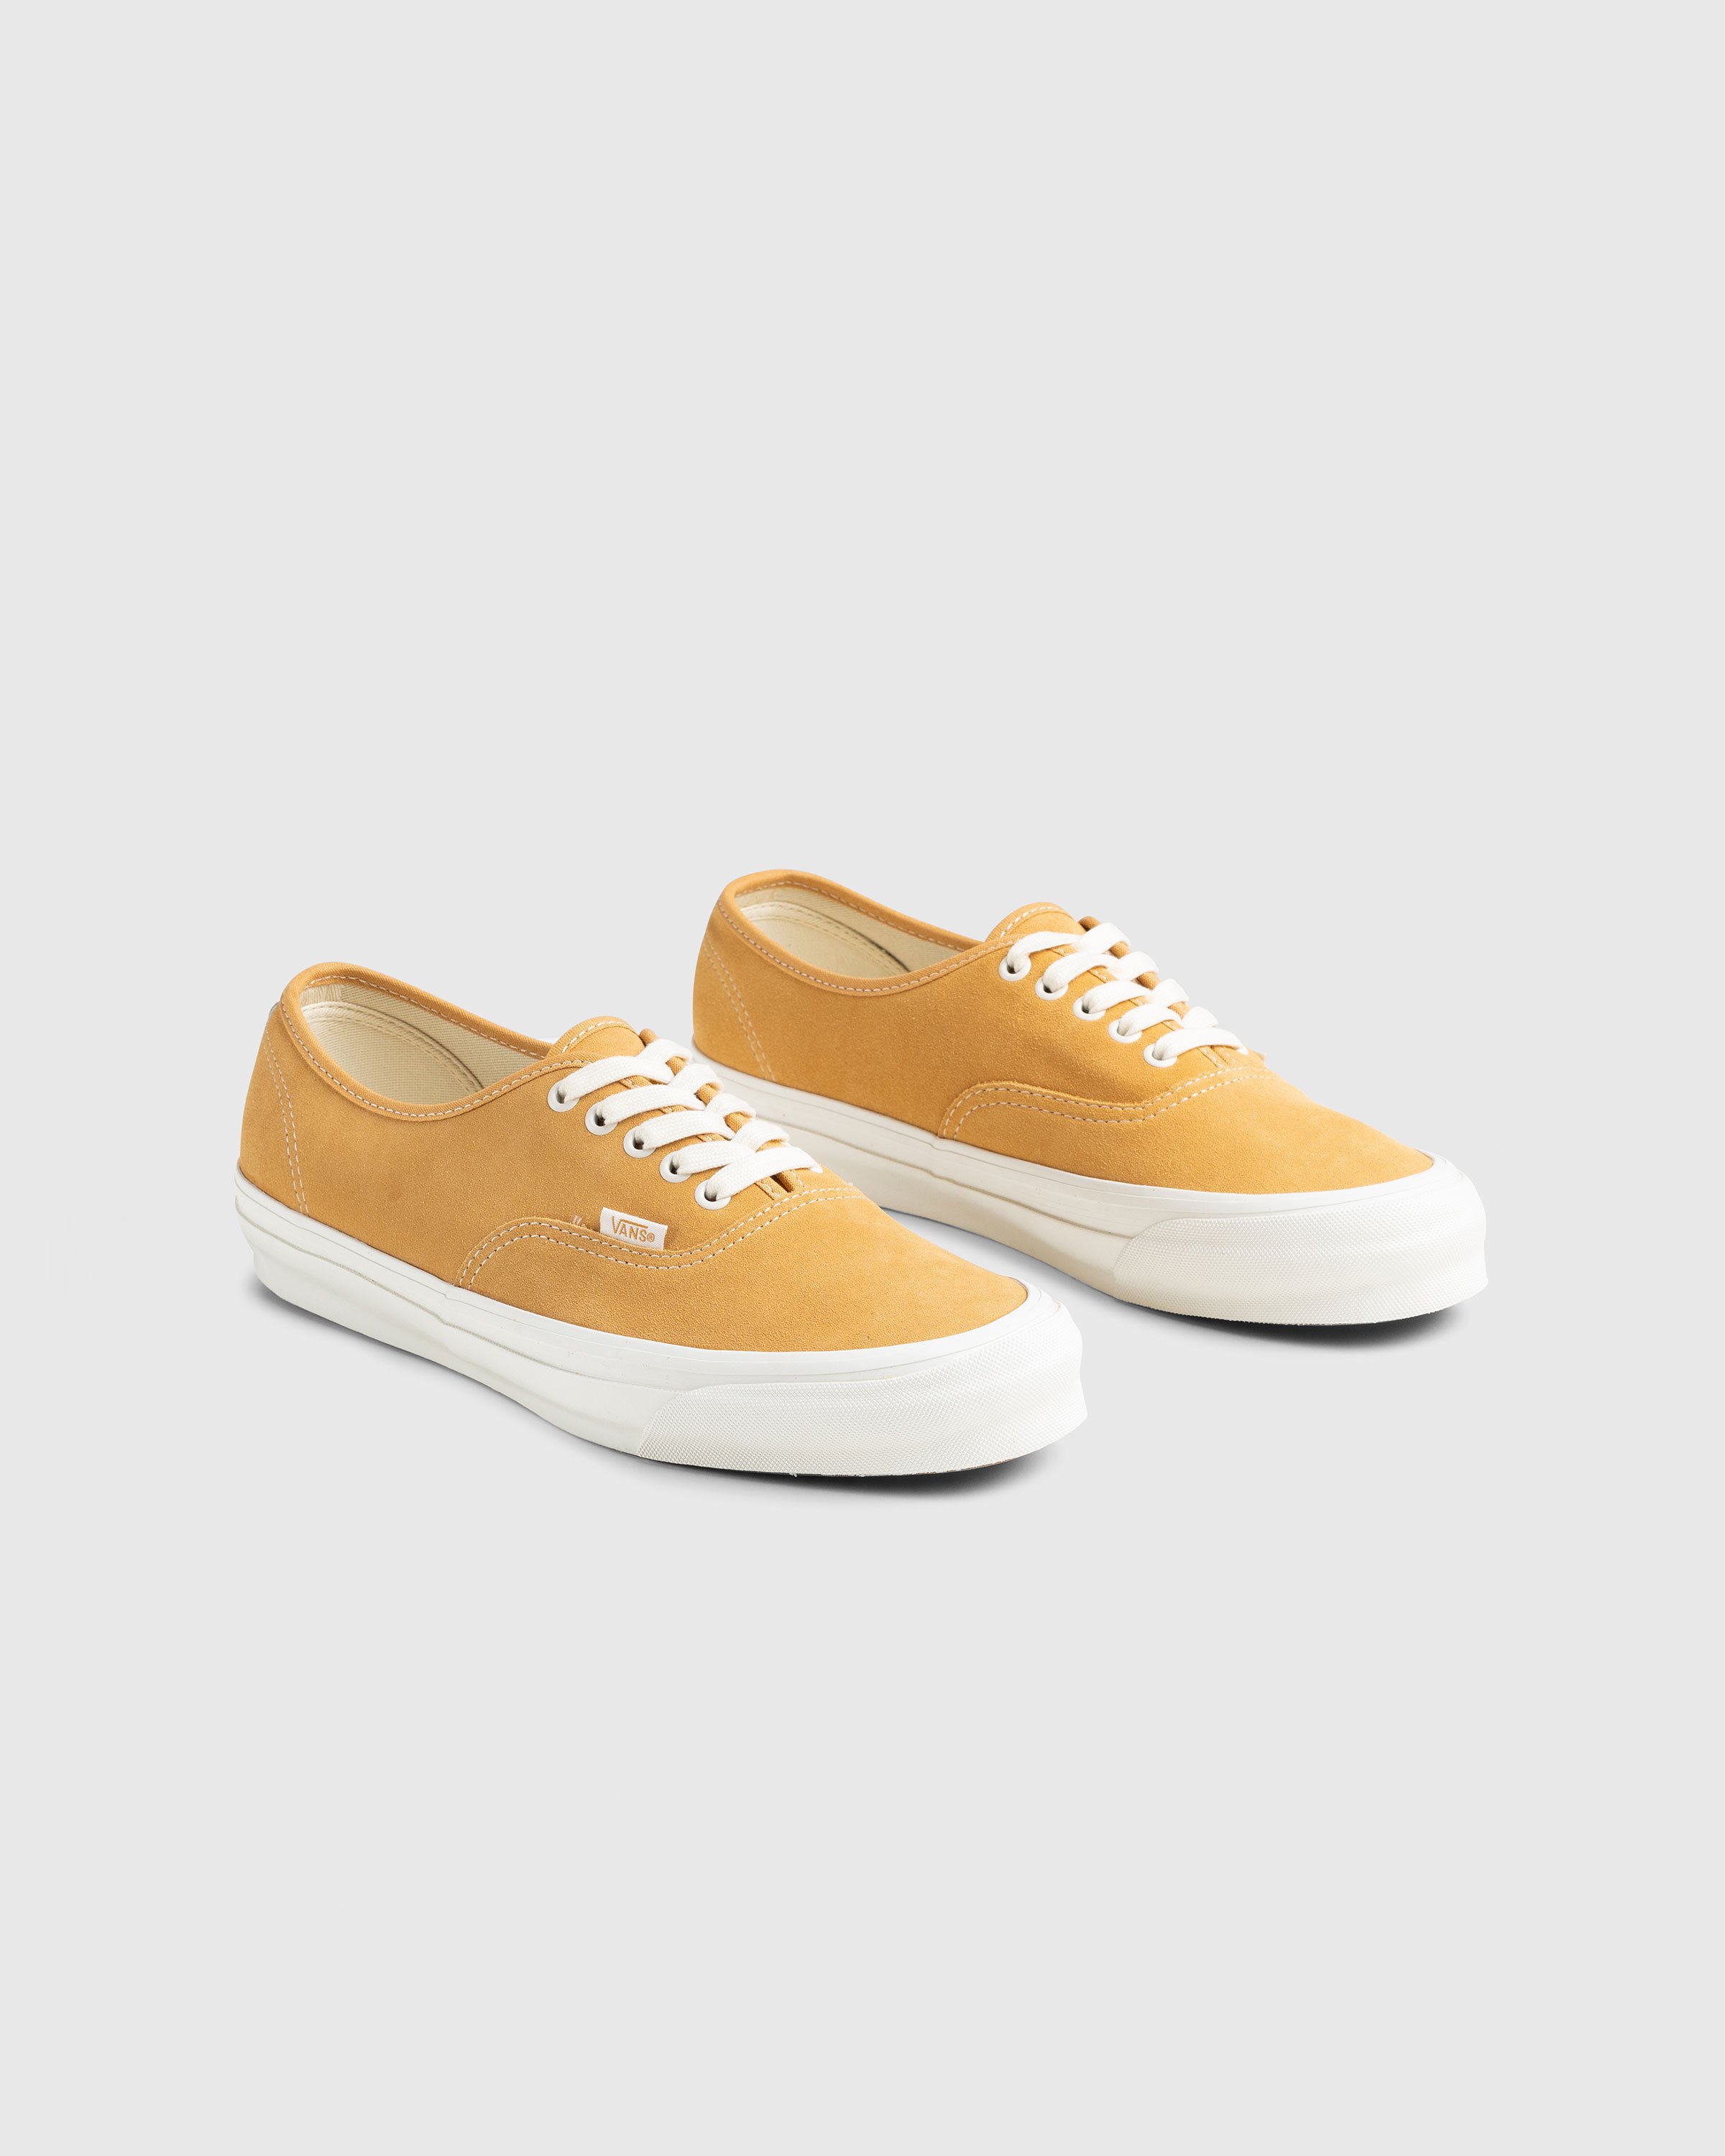 Vans - UA OG Authentic LX Suede Yellow - Footwear - Yellow - Image 3